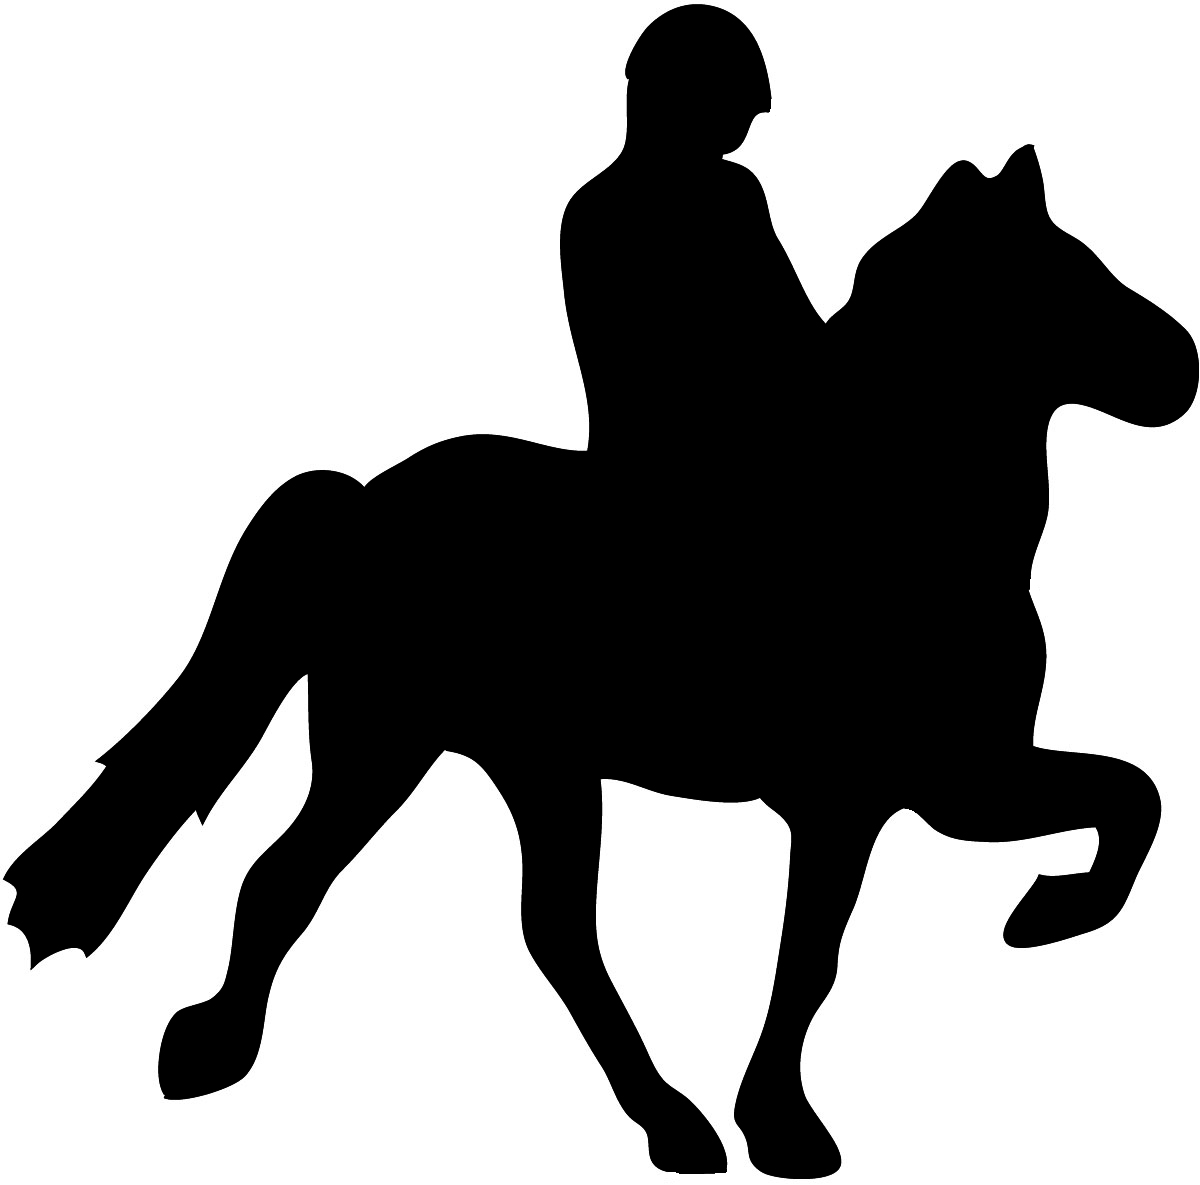 Horse silhouette with rider